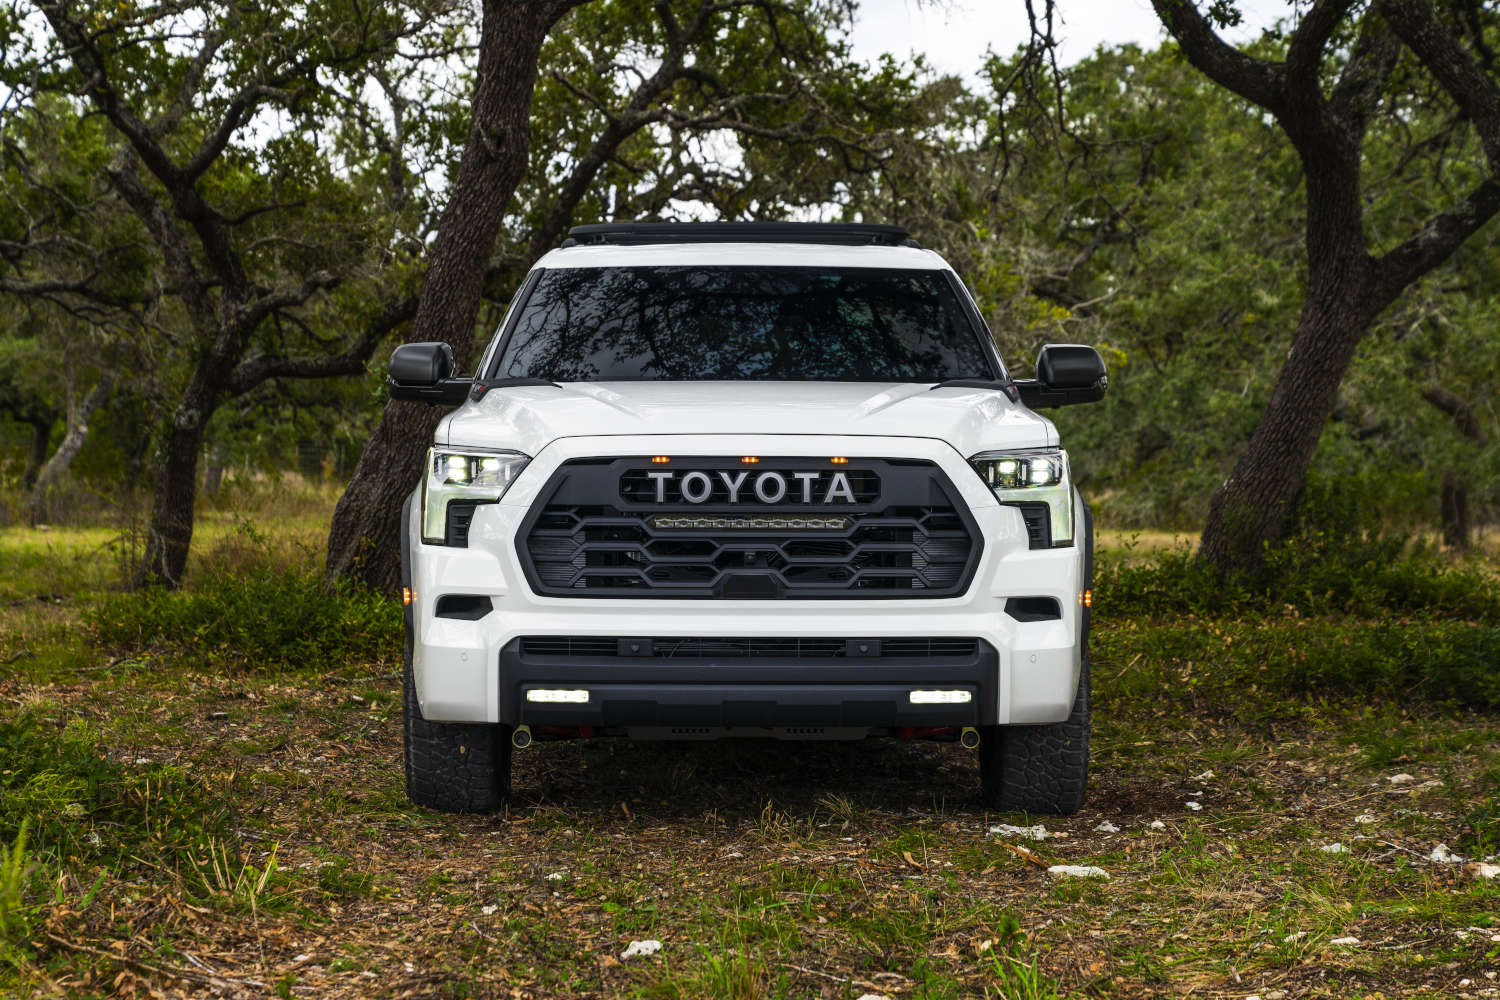 The Toyota SUVs with a TRD Pro trim include this Sequoia in white